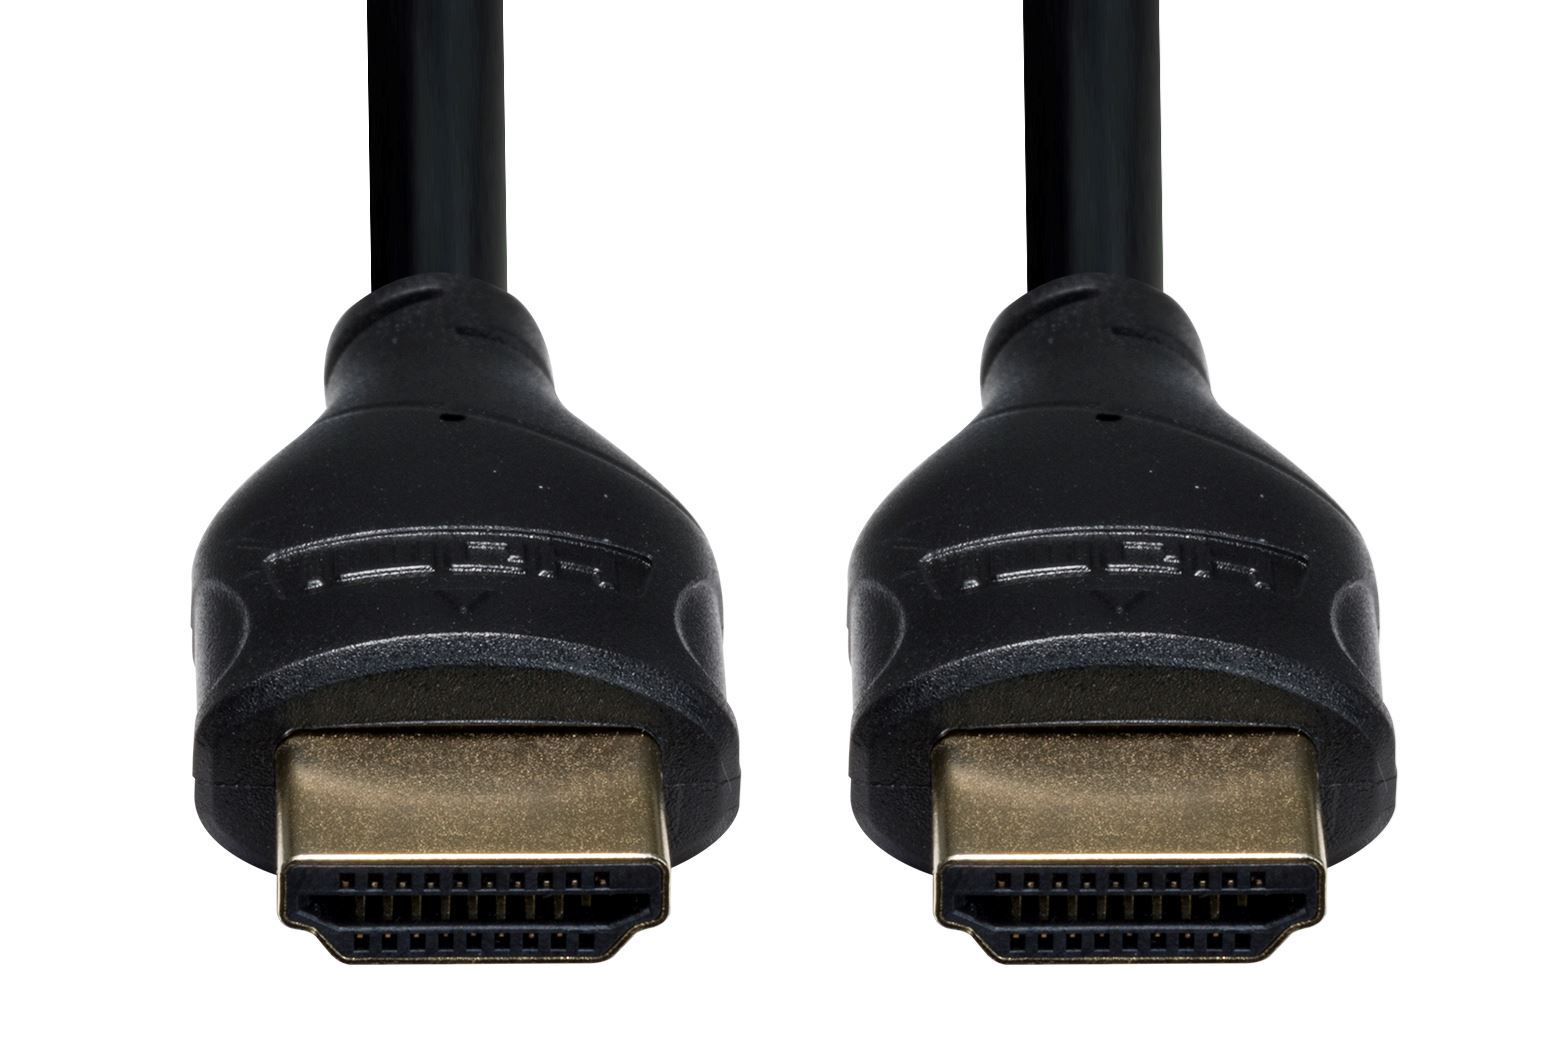 DYNAMIX_0.75m_HDMI_10Gbs_Slimline_High-Speed_Cable_with_Ethernet._Max_Res:_4K2K@24/30Hz_(3840x2160)_8_Audio_channels._8bit_colour_depth._Supports_CEC,_3D,_ARC,_Ethernet. 887